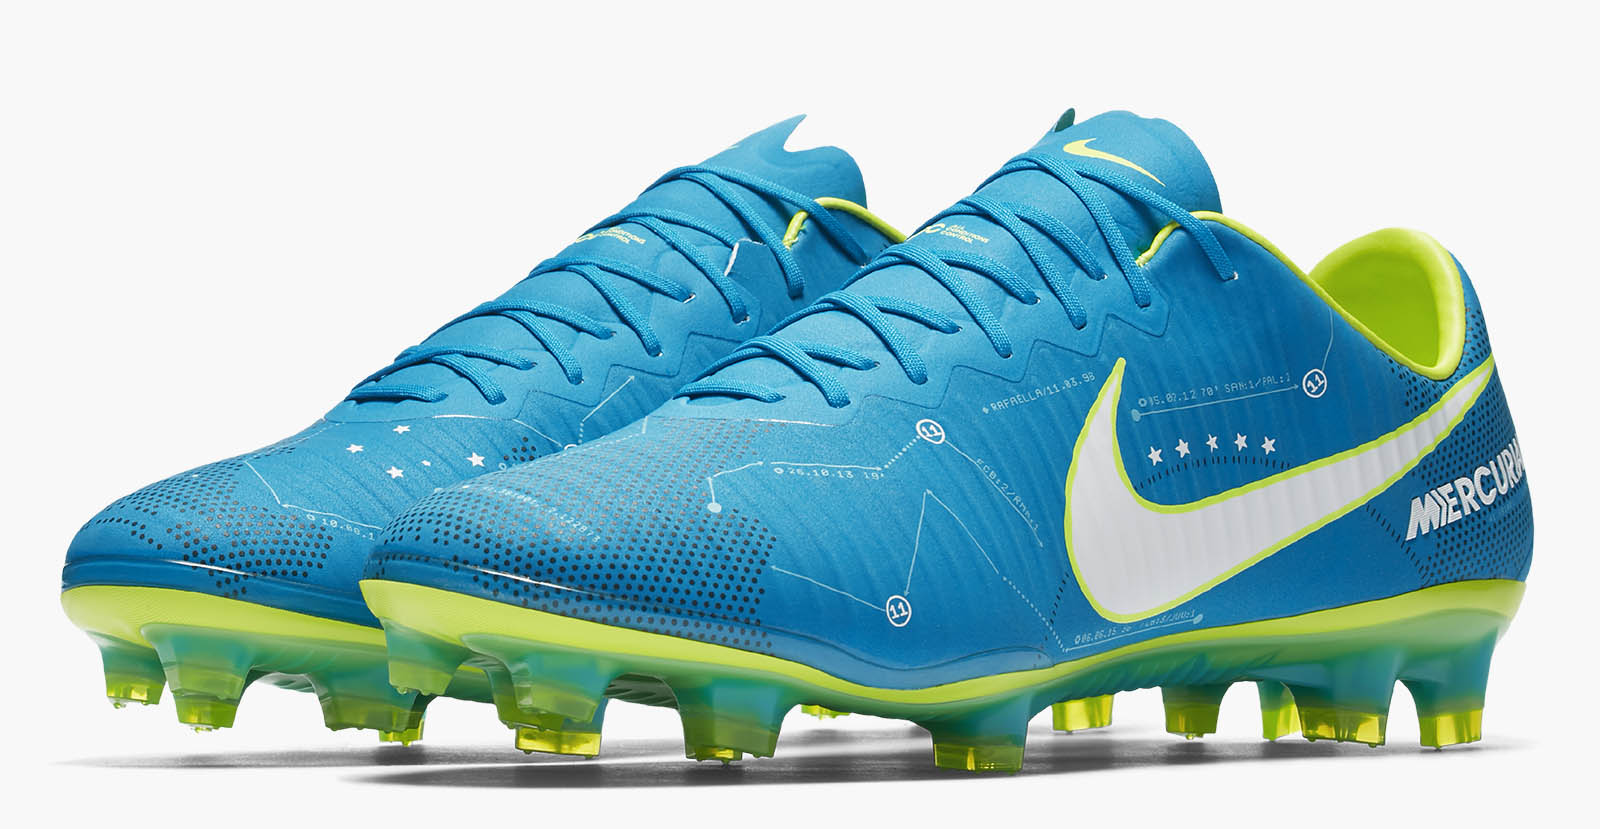 First-Ever - Nike Mercurial Vapor XI In The Stars' 2017 Signature Boots Revealed - Headlines